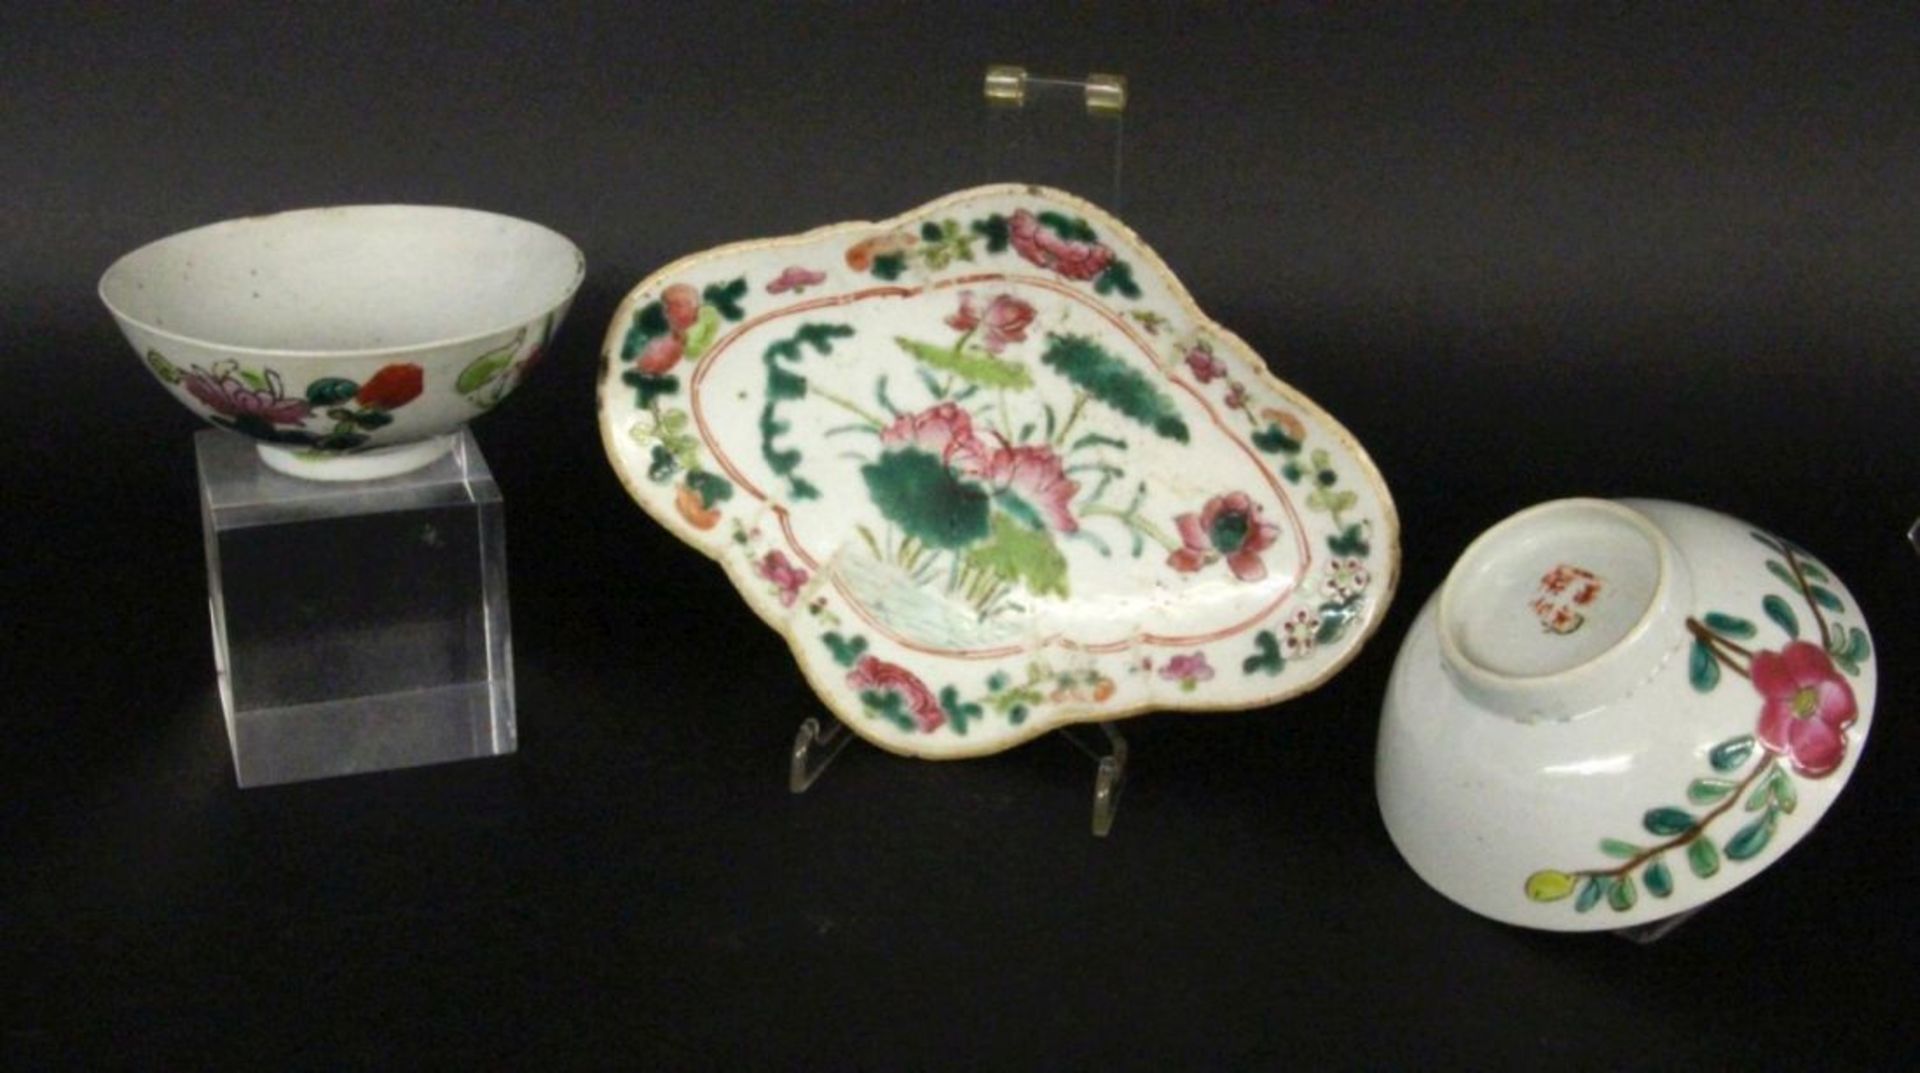 THREE BOWLS probably Qing dynasty Porcelain with coloured painted floral decoration. Round